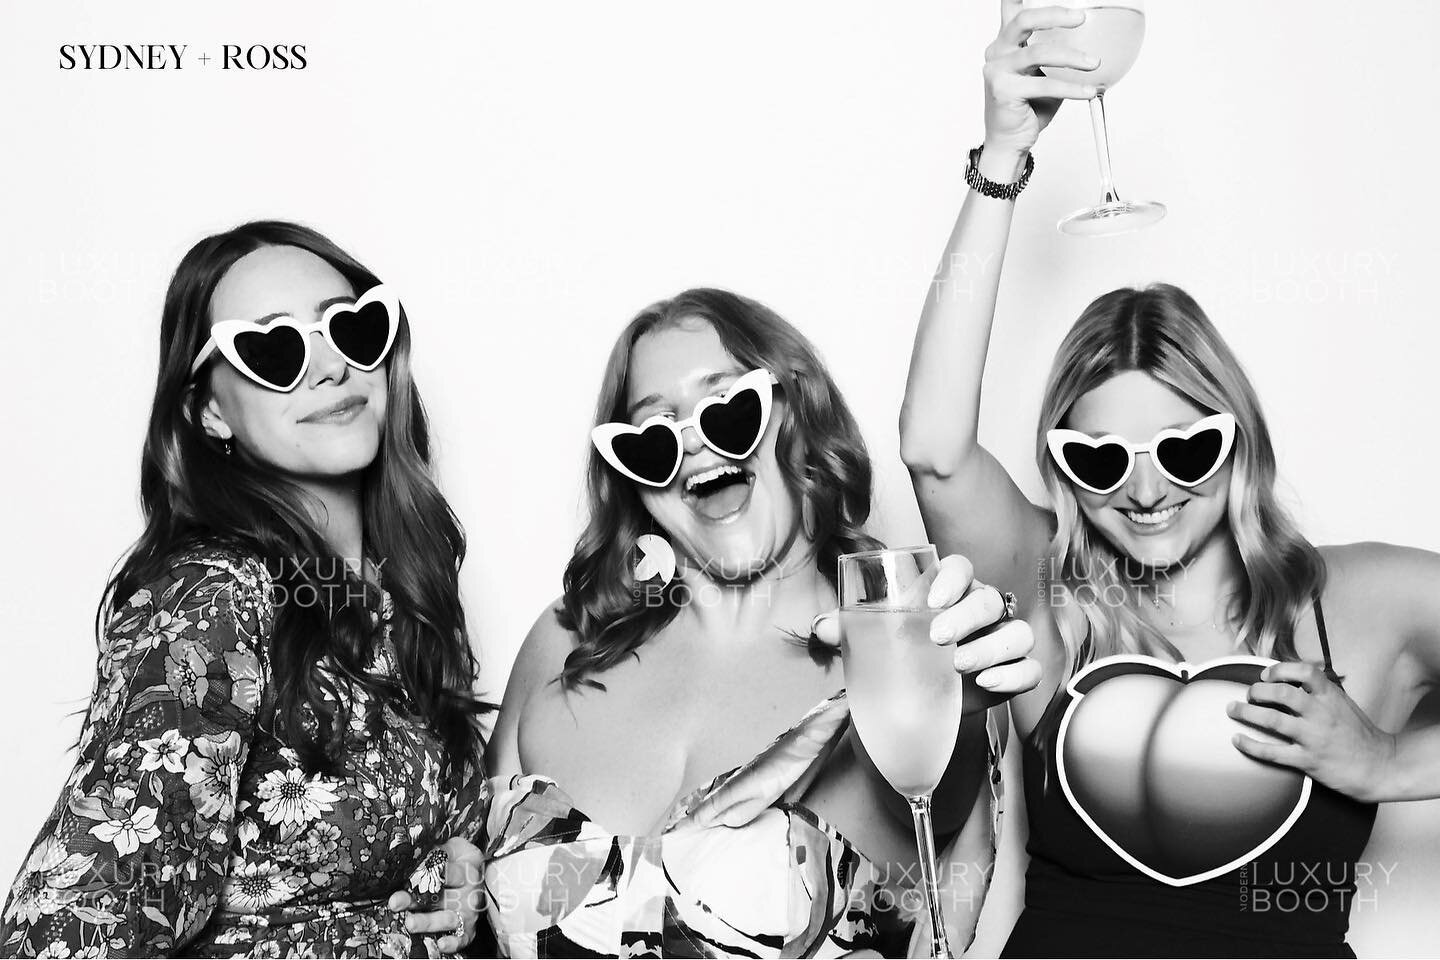 Cheers to June!!! This is my favorite month of the year because not only is it my birthday month but it&rsquo;s also filled with many beautiful events ☺️
Cheers to a beautiful summer and many more celebrations ☀️
.
.
.
#atlantaphotobooth
#photobootha